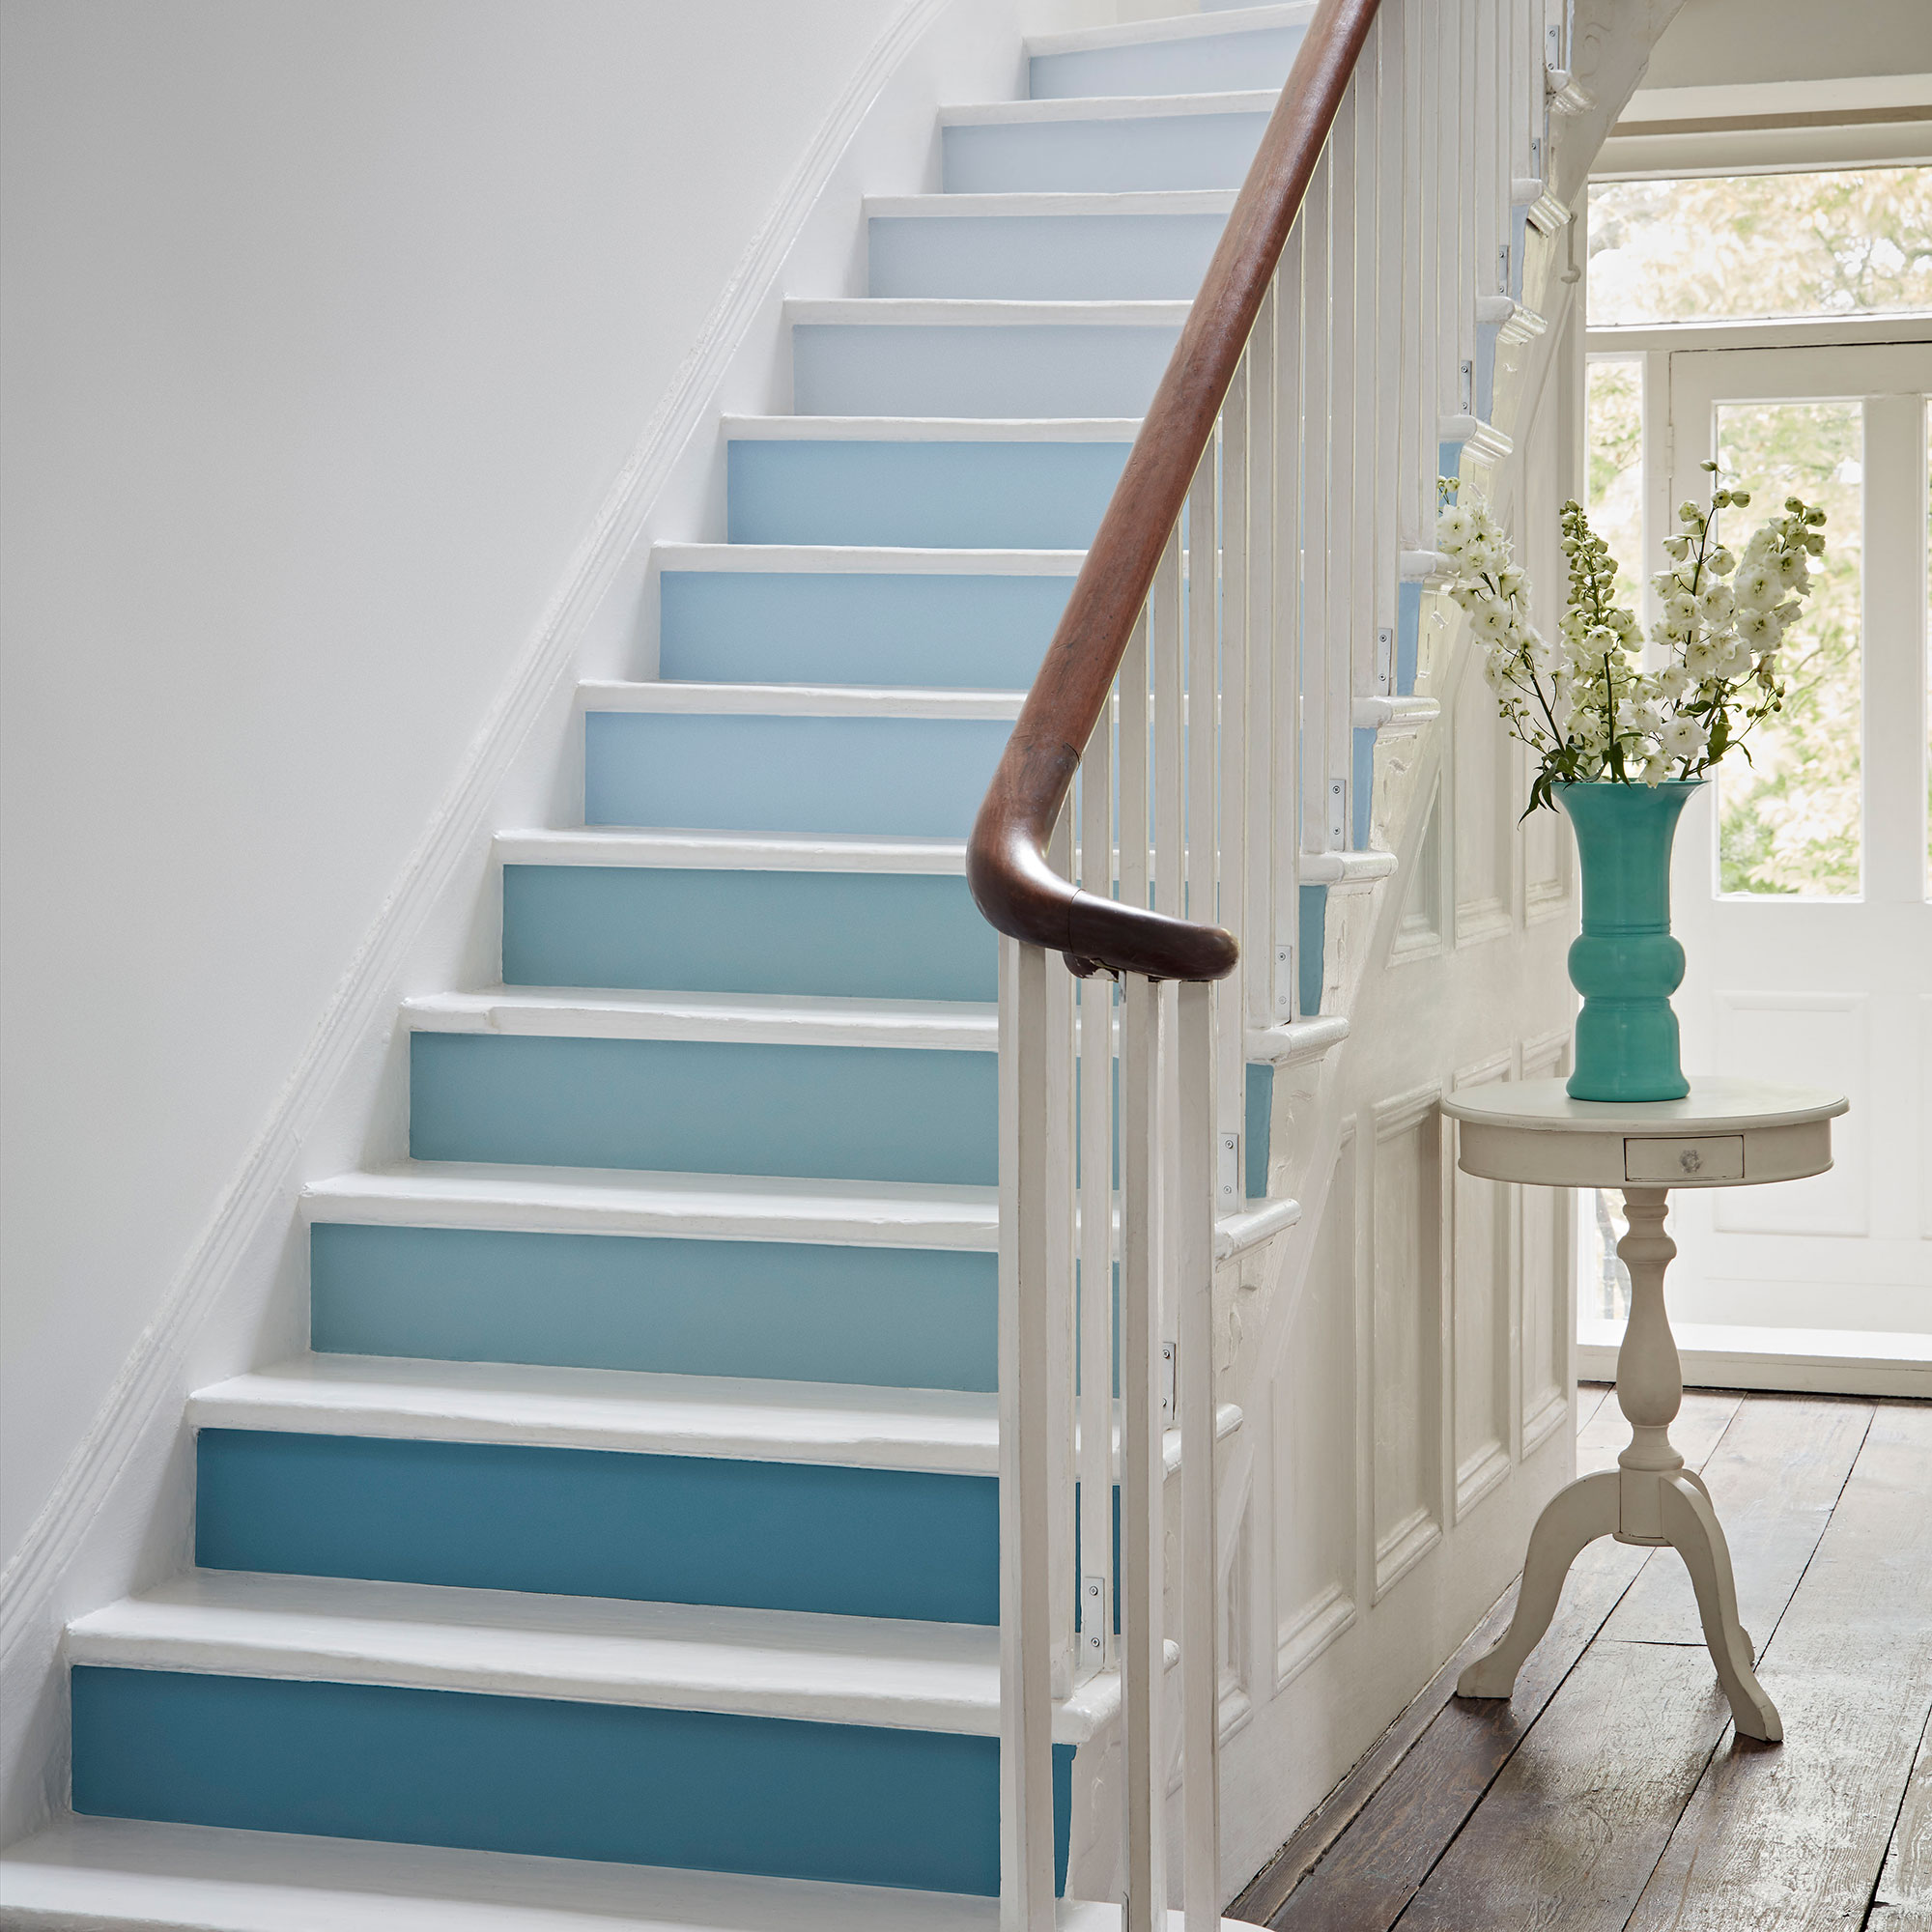 Painted Stair Ideas - 11 Creative Ways To Raise The Bar | Ideal Home